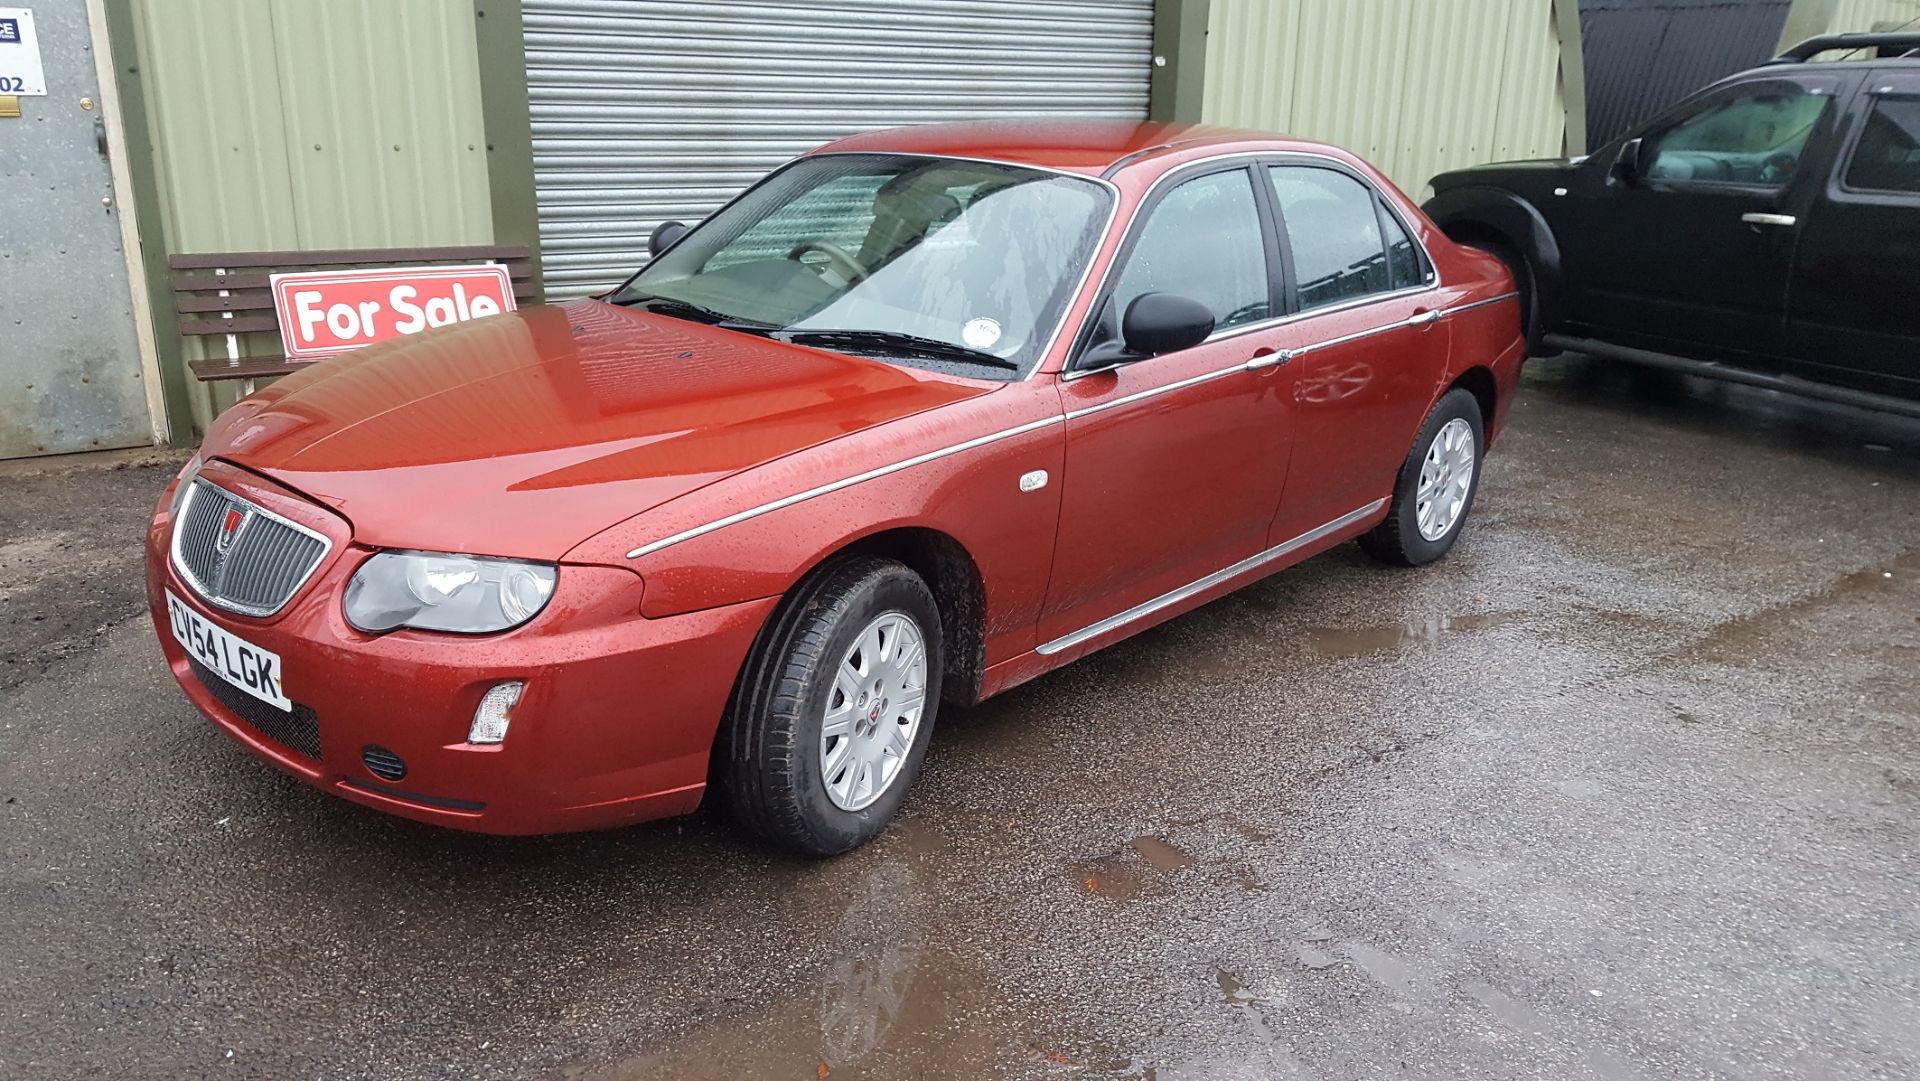 2004/54 ROVER 75 CLASSIC 45,000 MILES ! RED PETROL 4 DOOR SALOON, SHOWING 1 FORMER KEEPER *NO VAT* - Image 2 of 8